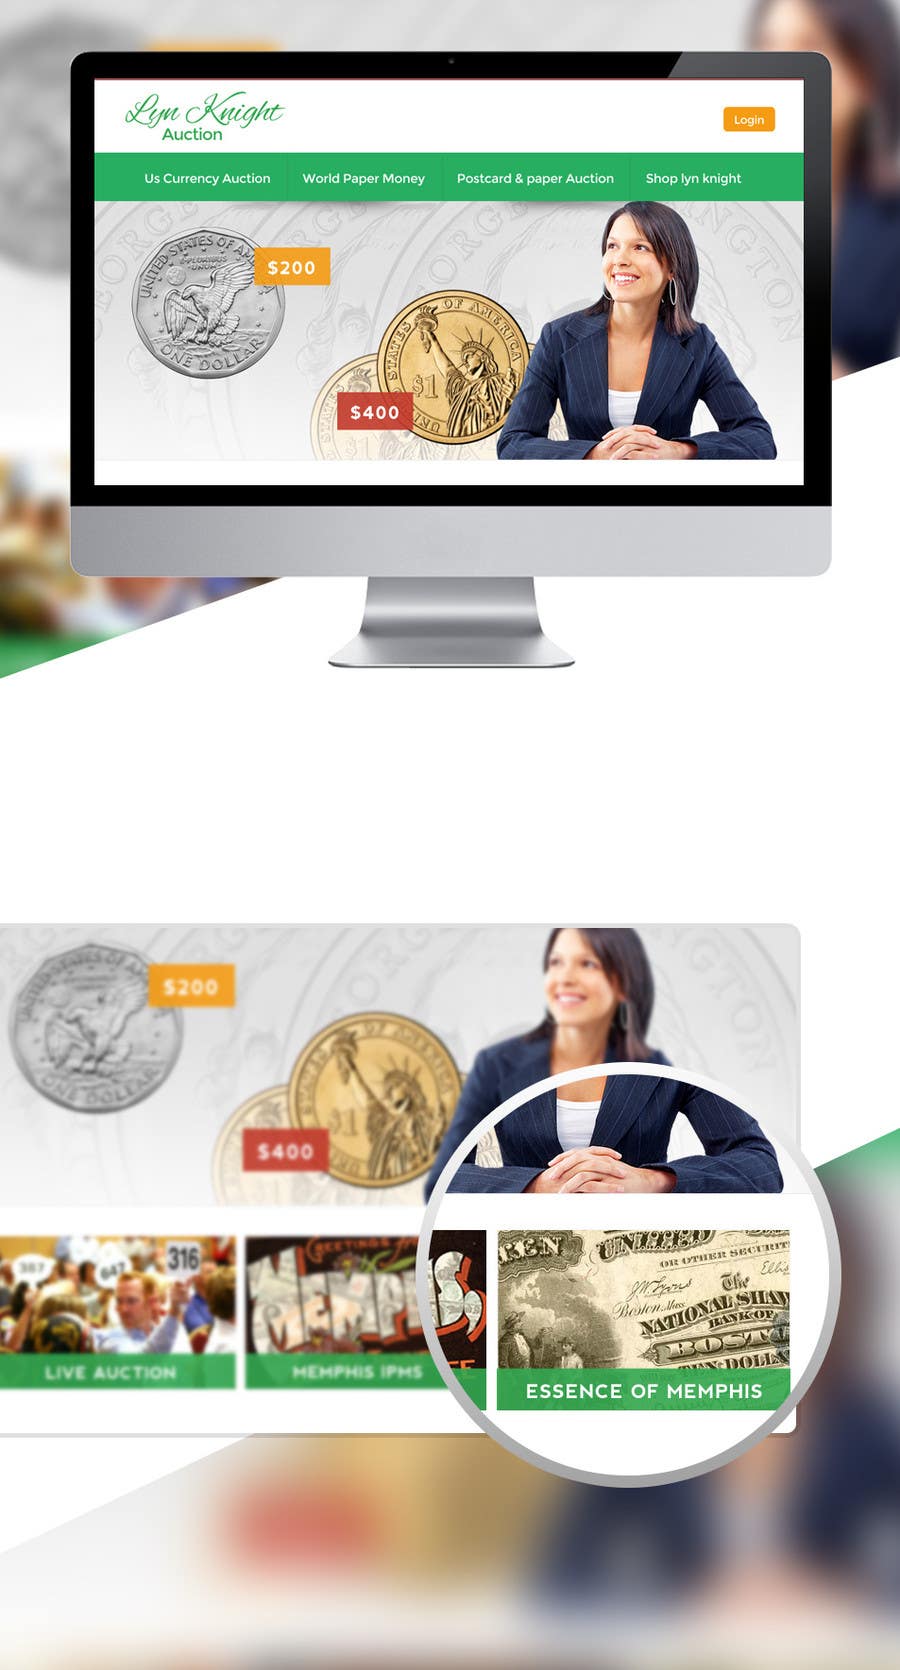 Penyertaan Peraduan #9 untuk                                                 Redesign an Existing Website for a Currency Auction & Store
                                            